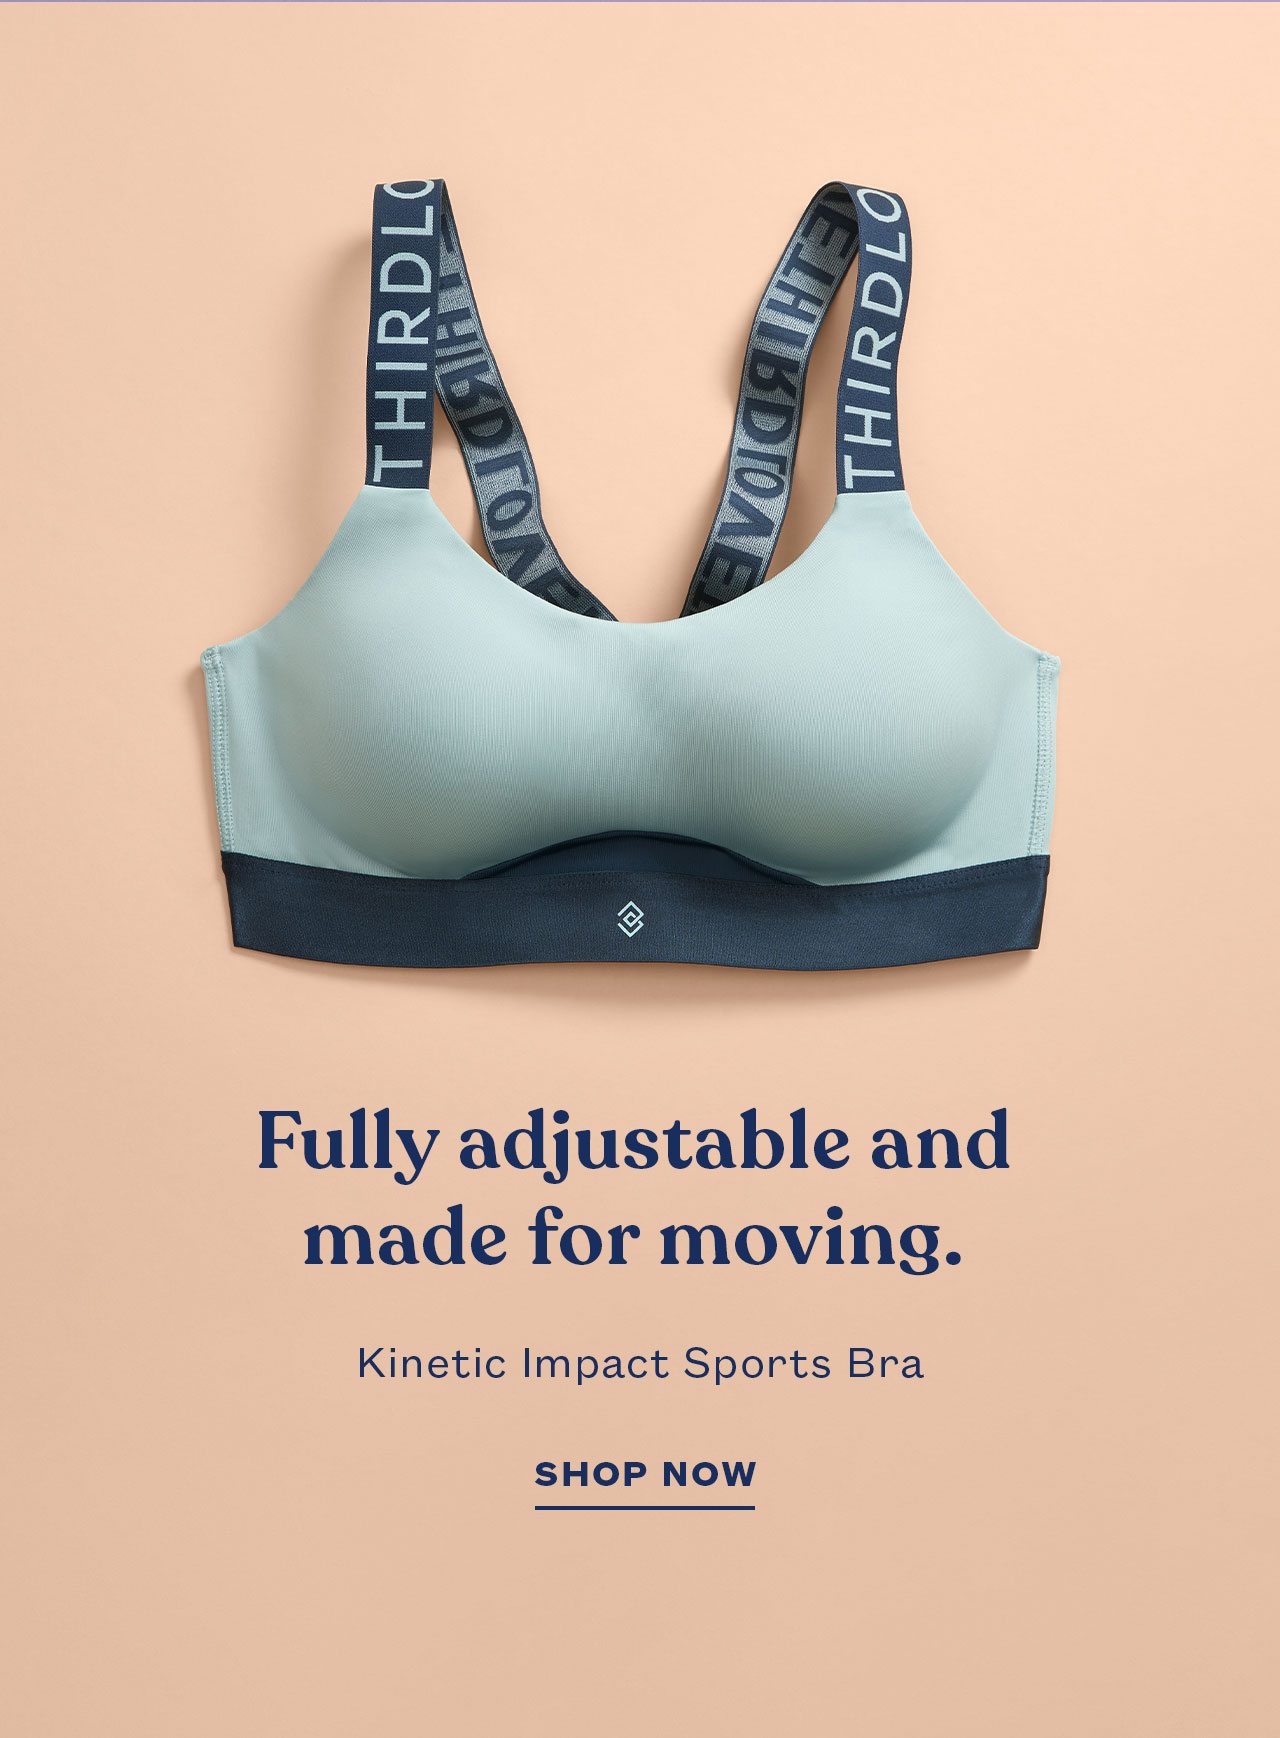 Fully adjustable and made for moving. | Kinetic Impact Sports Bra